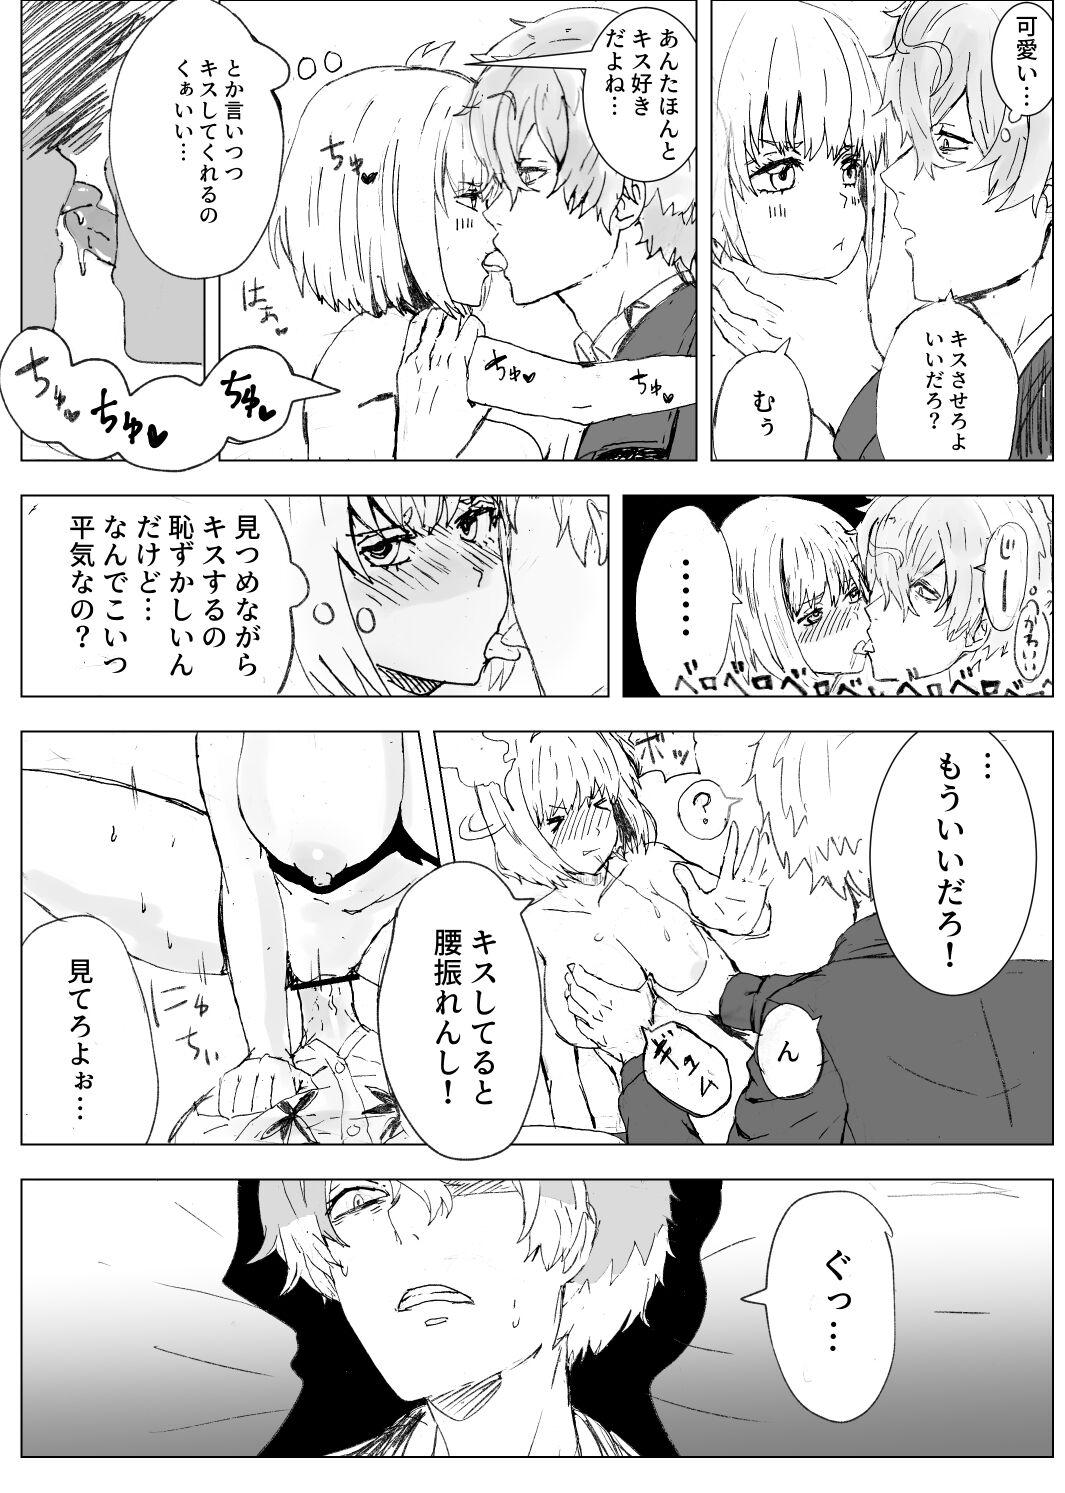 Role Play Magichisa Sex Battle Edition - Lycoris recoil Awesome - Page 2